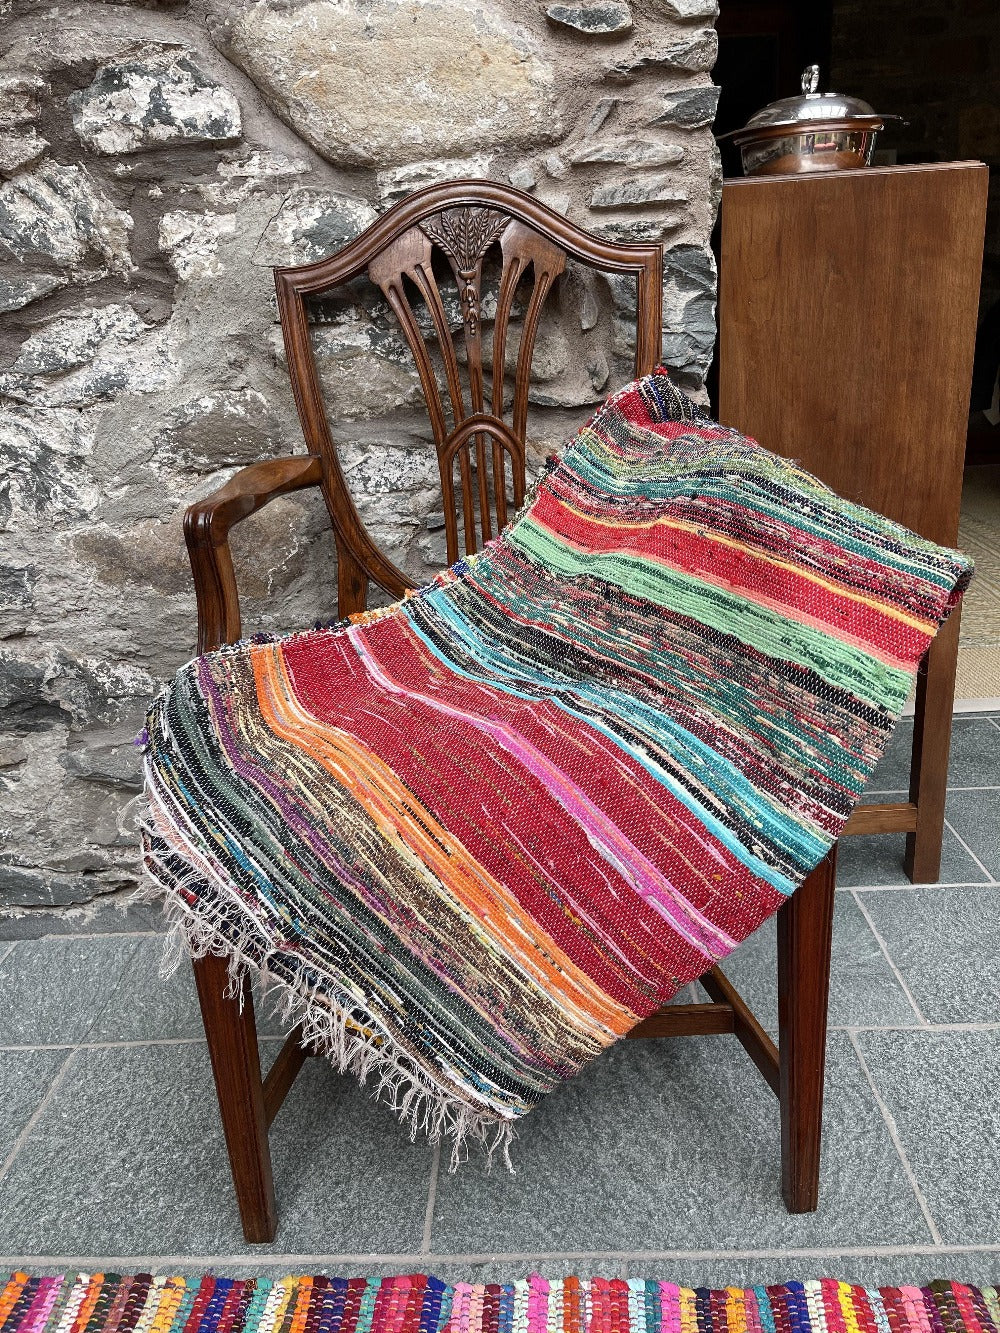 Soft Throw Hand Woven with Multi Colour Recycled Sari Fabric - Second Nature Online